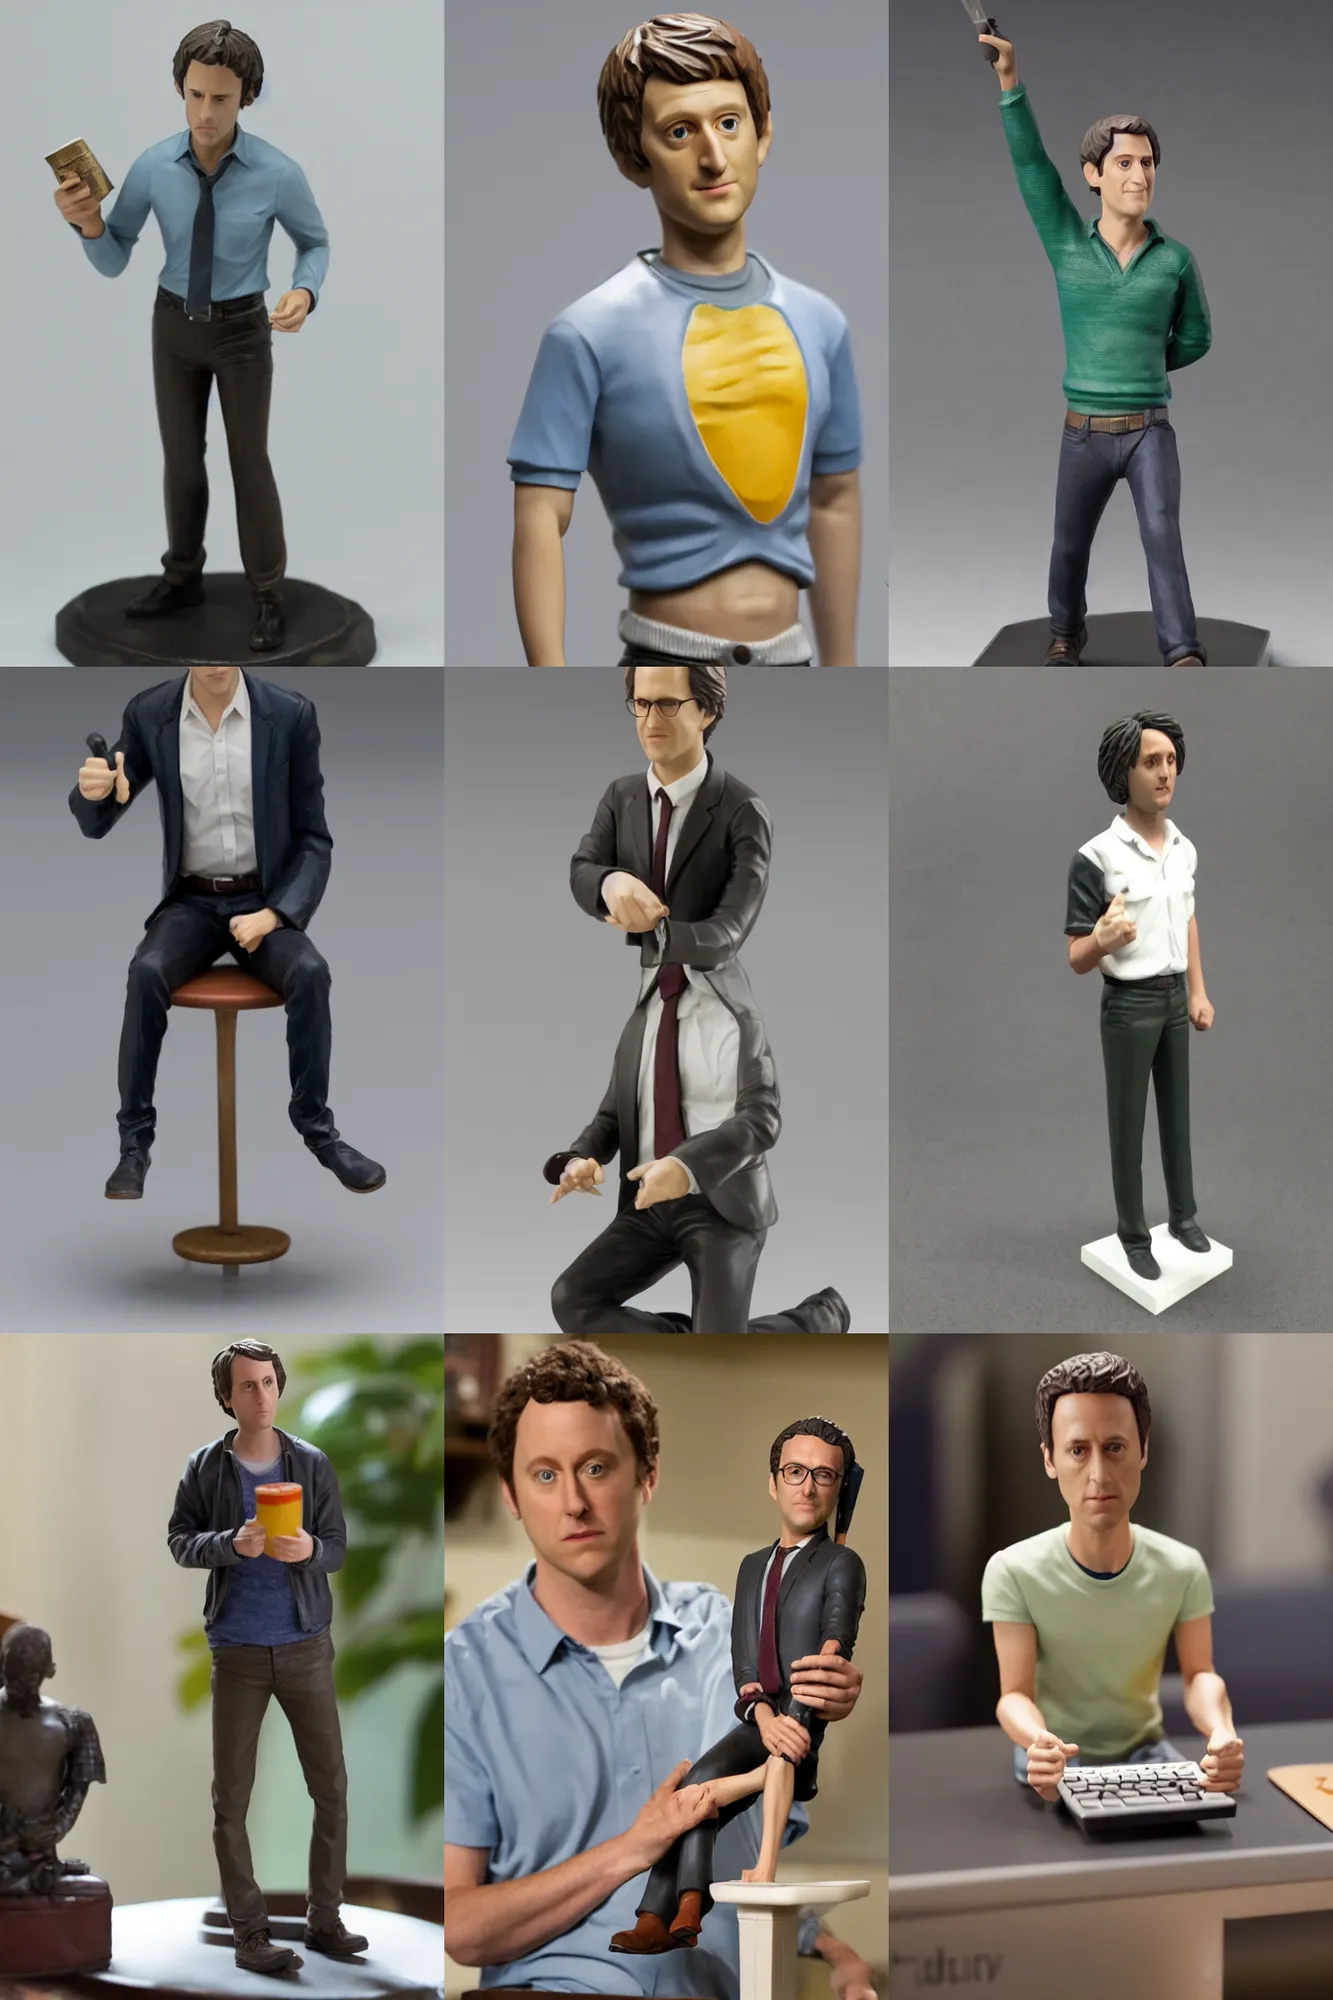 Prompt: Figurine of a character from 'Silicon Valley'